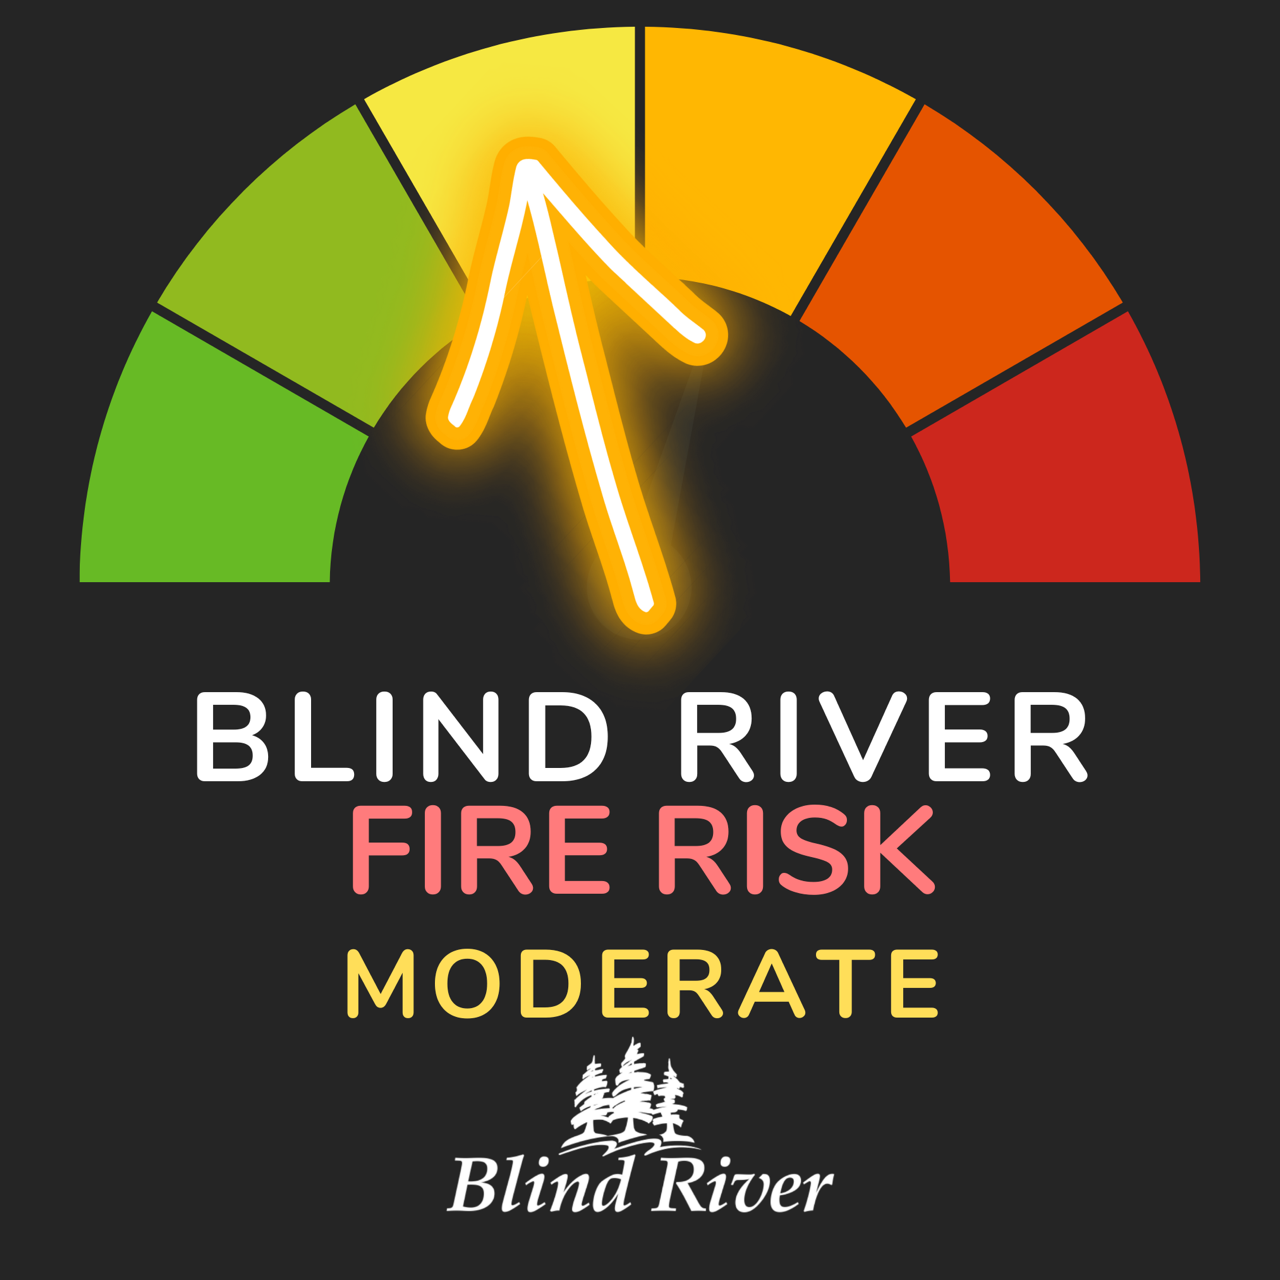 fire rating moderate poster